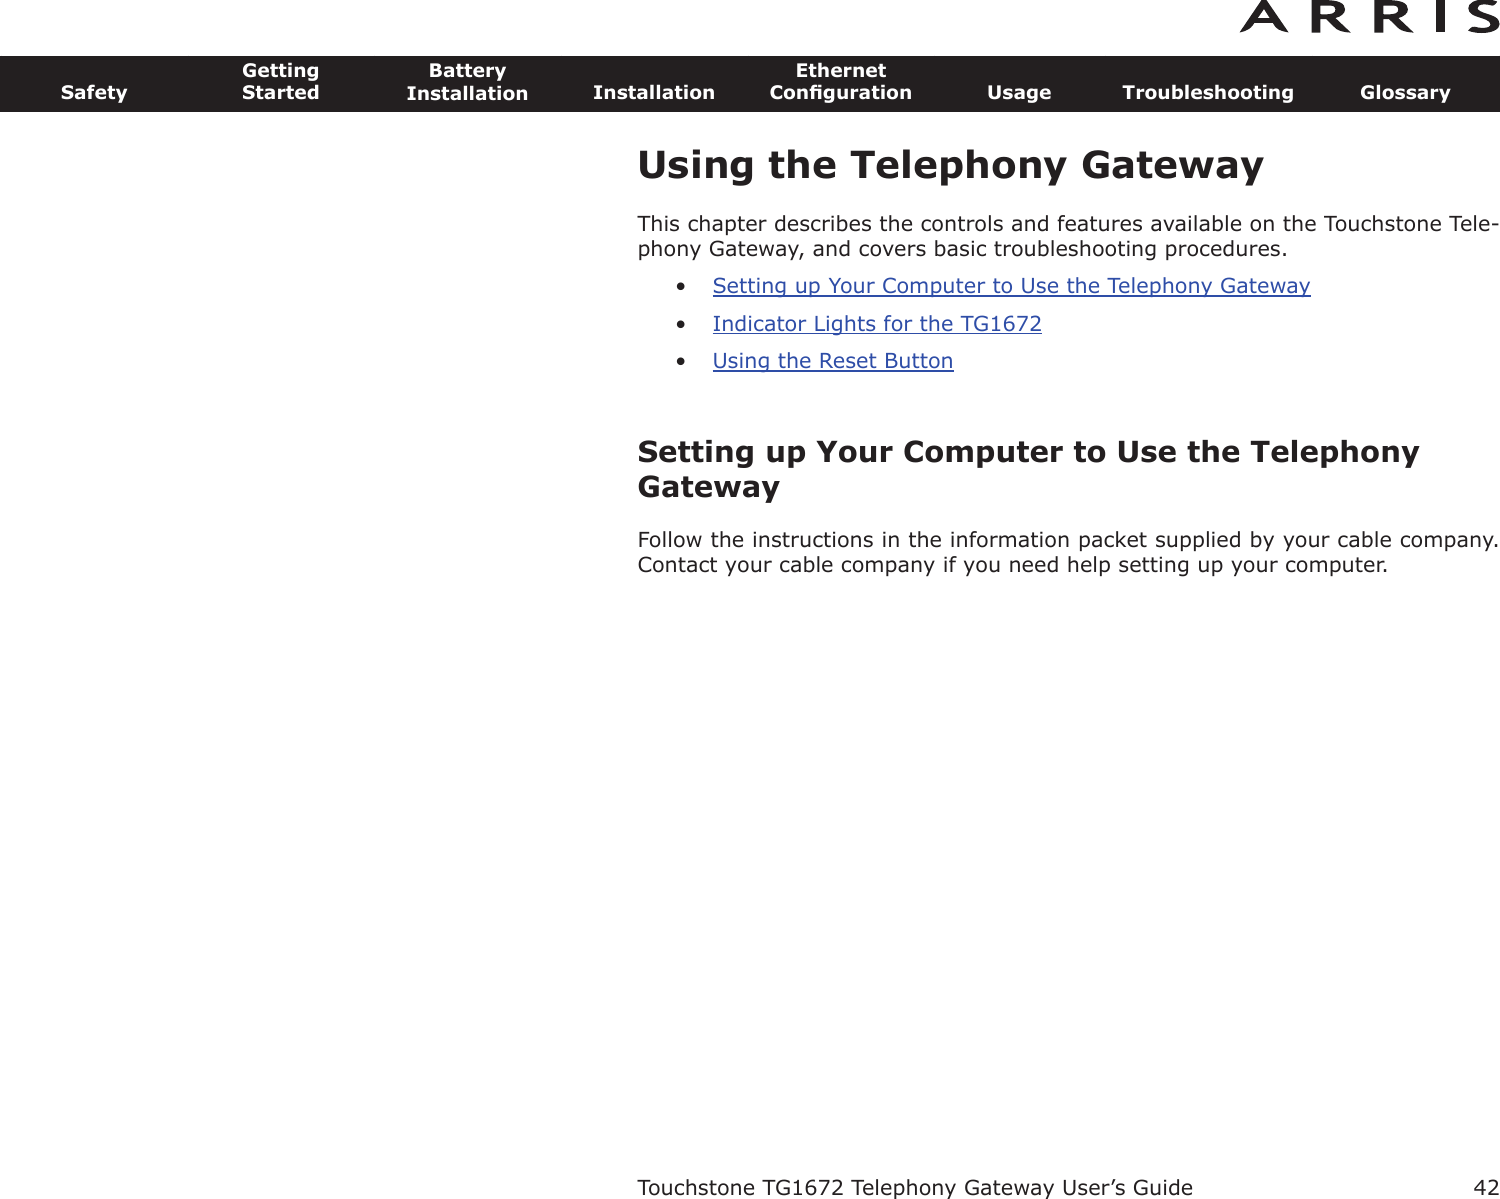 42SafetyGettingStartedBatteryInstallation InstallationEthernetConﬁguration Usage Troubleshooting GlossaryTouchstone TG1672 Telephony Gateway User’s GuideUsing the Telephony GatewayThis chapter describes the controls and features available on the Touchstone Tele-phony Gateway, and covers basic troubleshooting procedures.•Setting up Your Computer to Use the Telephony Gateway•Indicator Lights for the TG1672•Using the Reset ButtonSetting up Your Computer to Use the TelephonyGatewayFollow the instructions in the information packet supplied by your cable company.Contact your cable company if you need help setting up your computer.